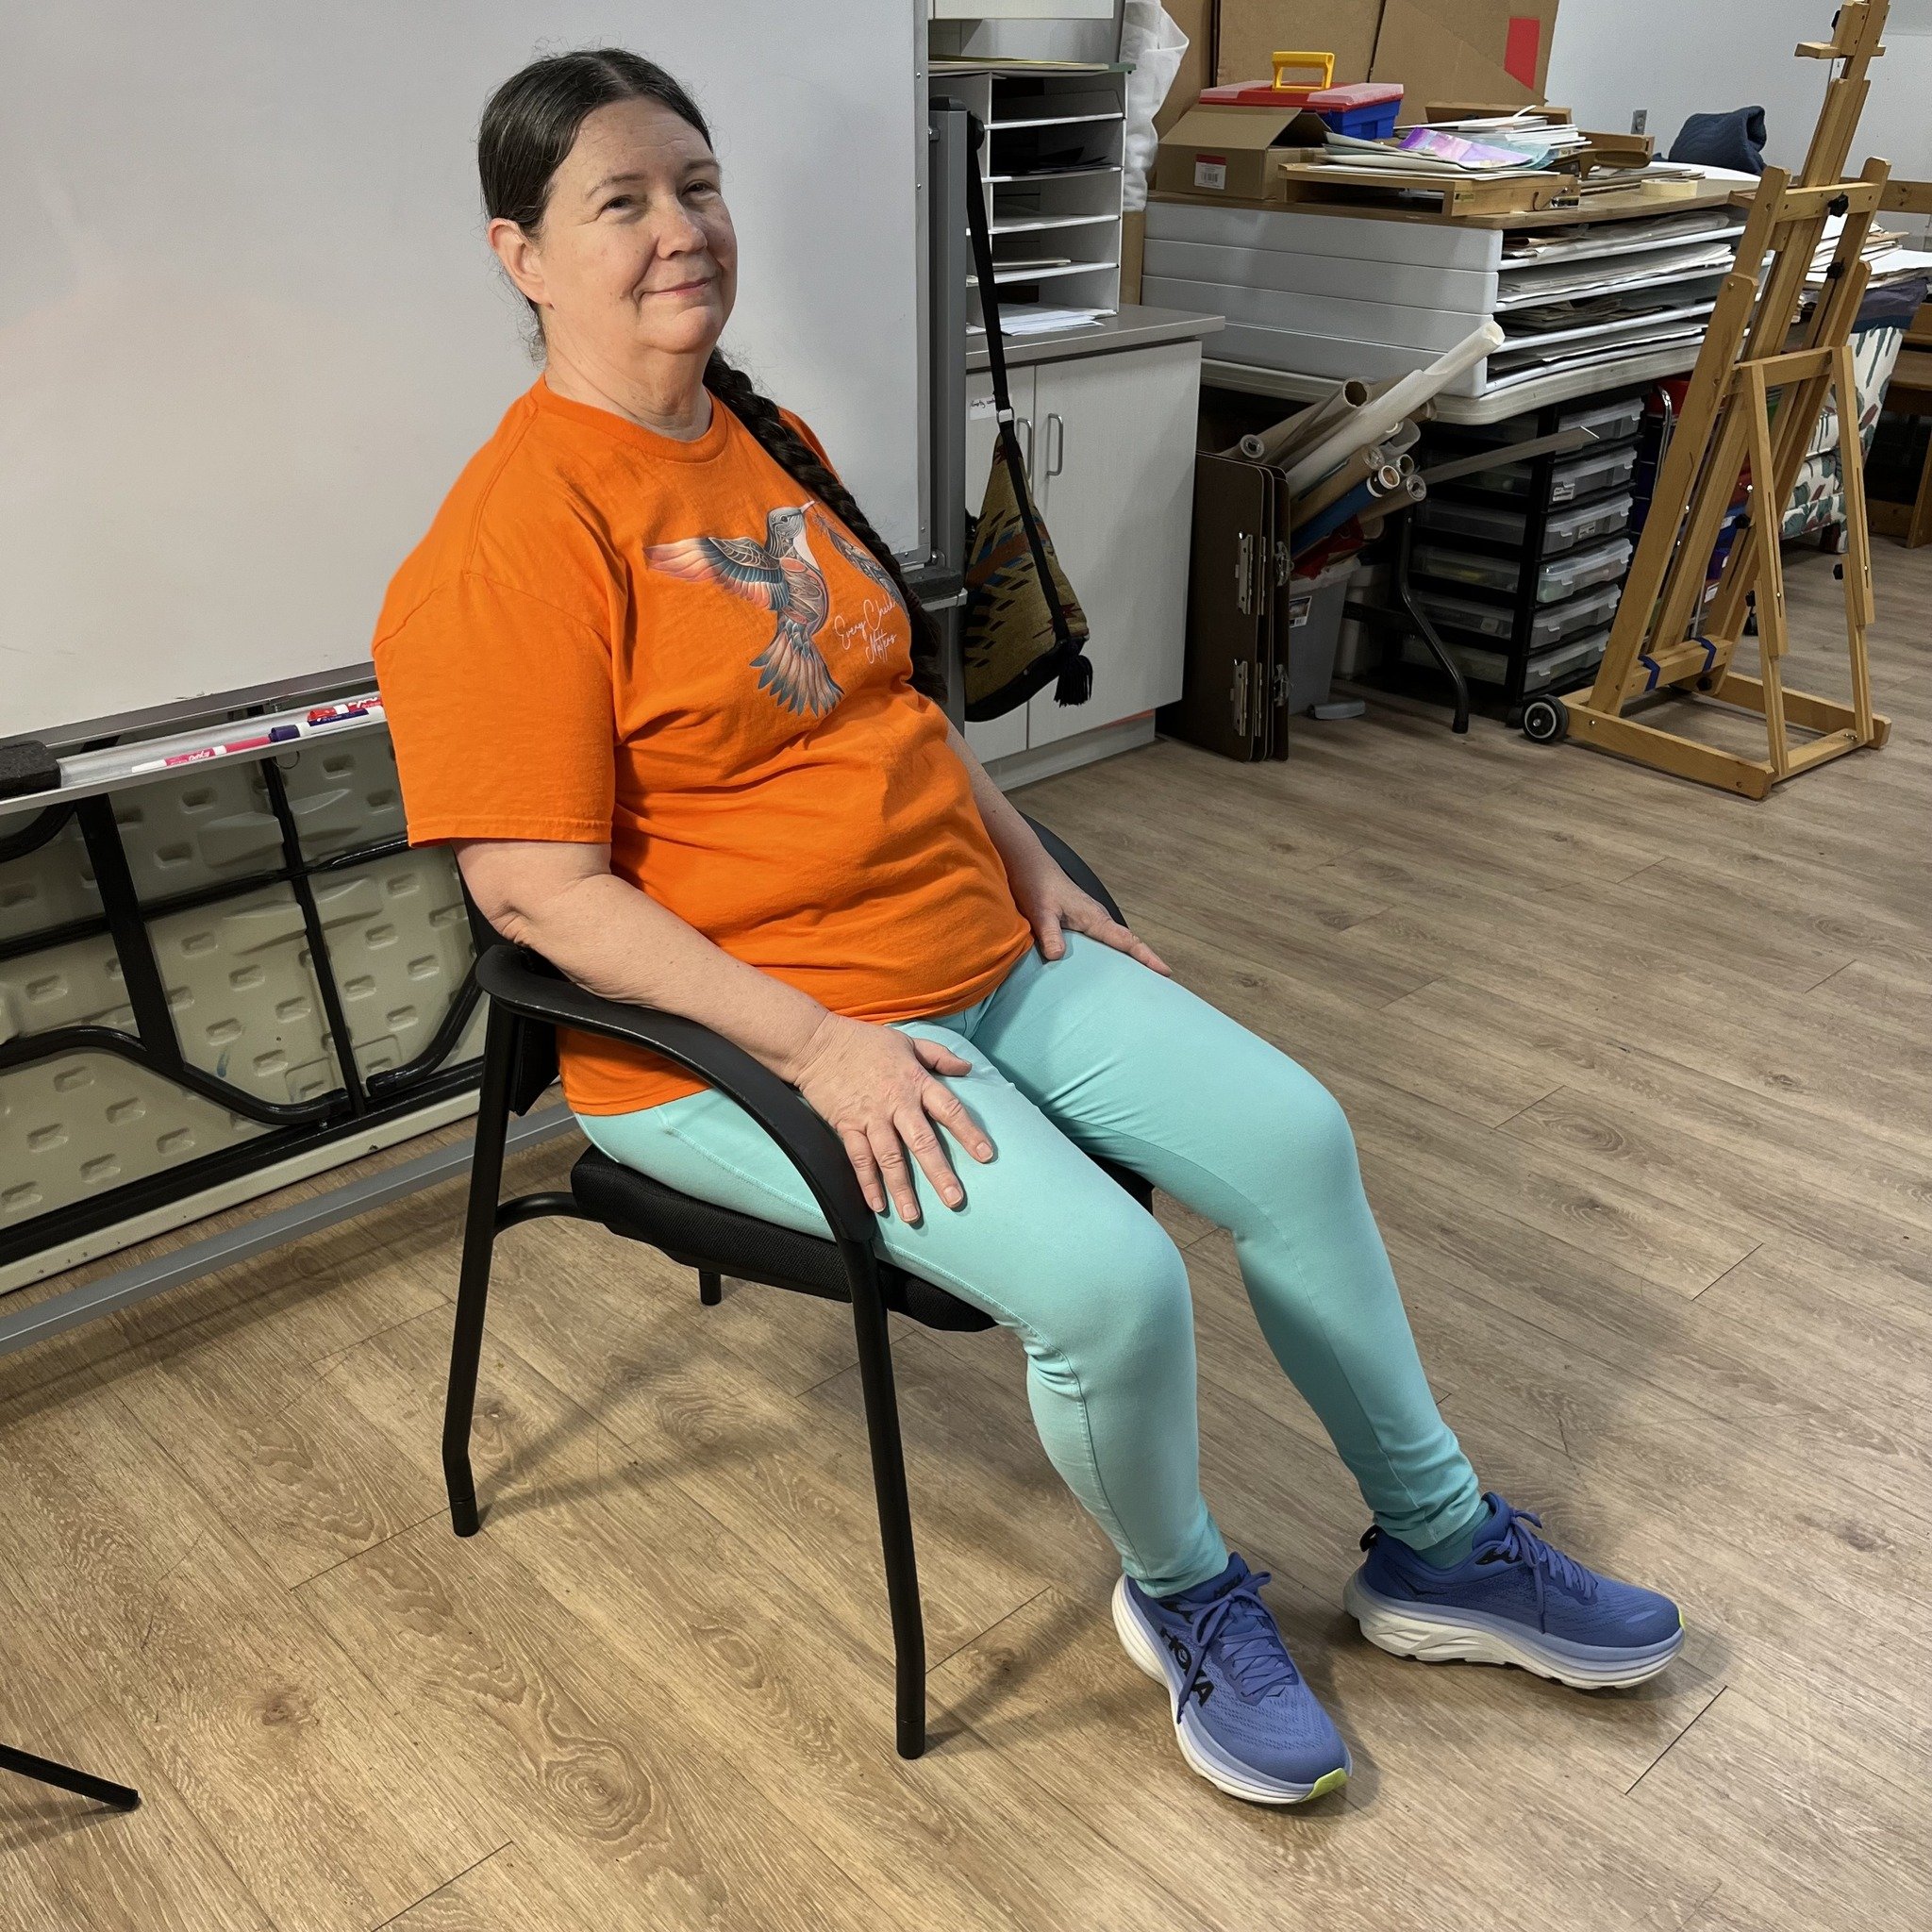 Big thanks to Sharon for modeling for our artists today! Keep an eye on our social media pages for the resulting artwork tomorrow.
---
If you would like to participate in Friday Morning Art Sessions remotely, feel free to draw or paint this week's mo